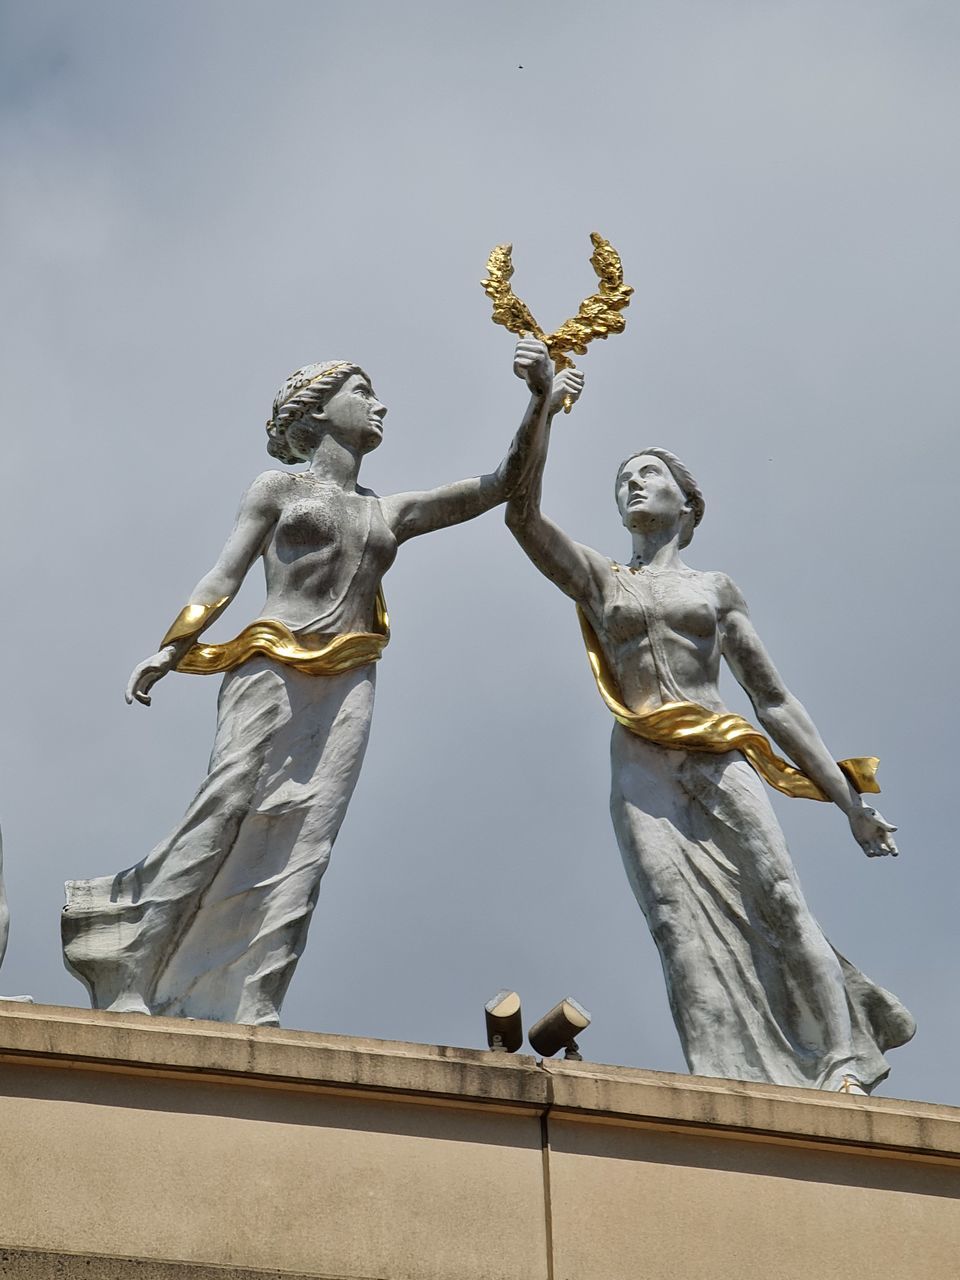 LOW ANGLE VIEW OF ANGEL STATUE AGAINST BUILDING